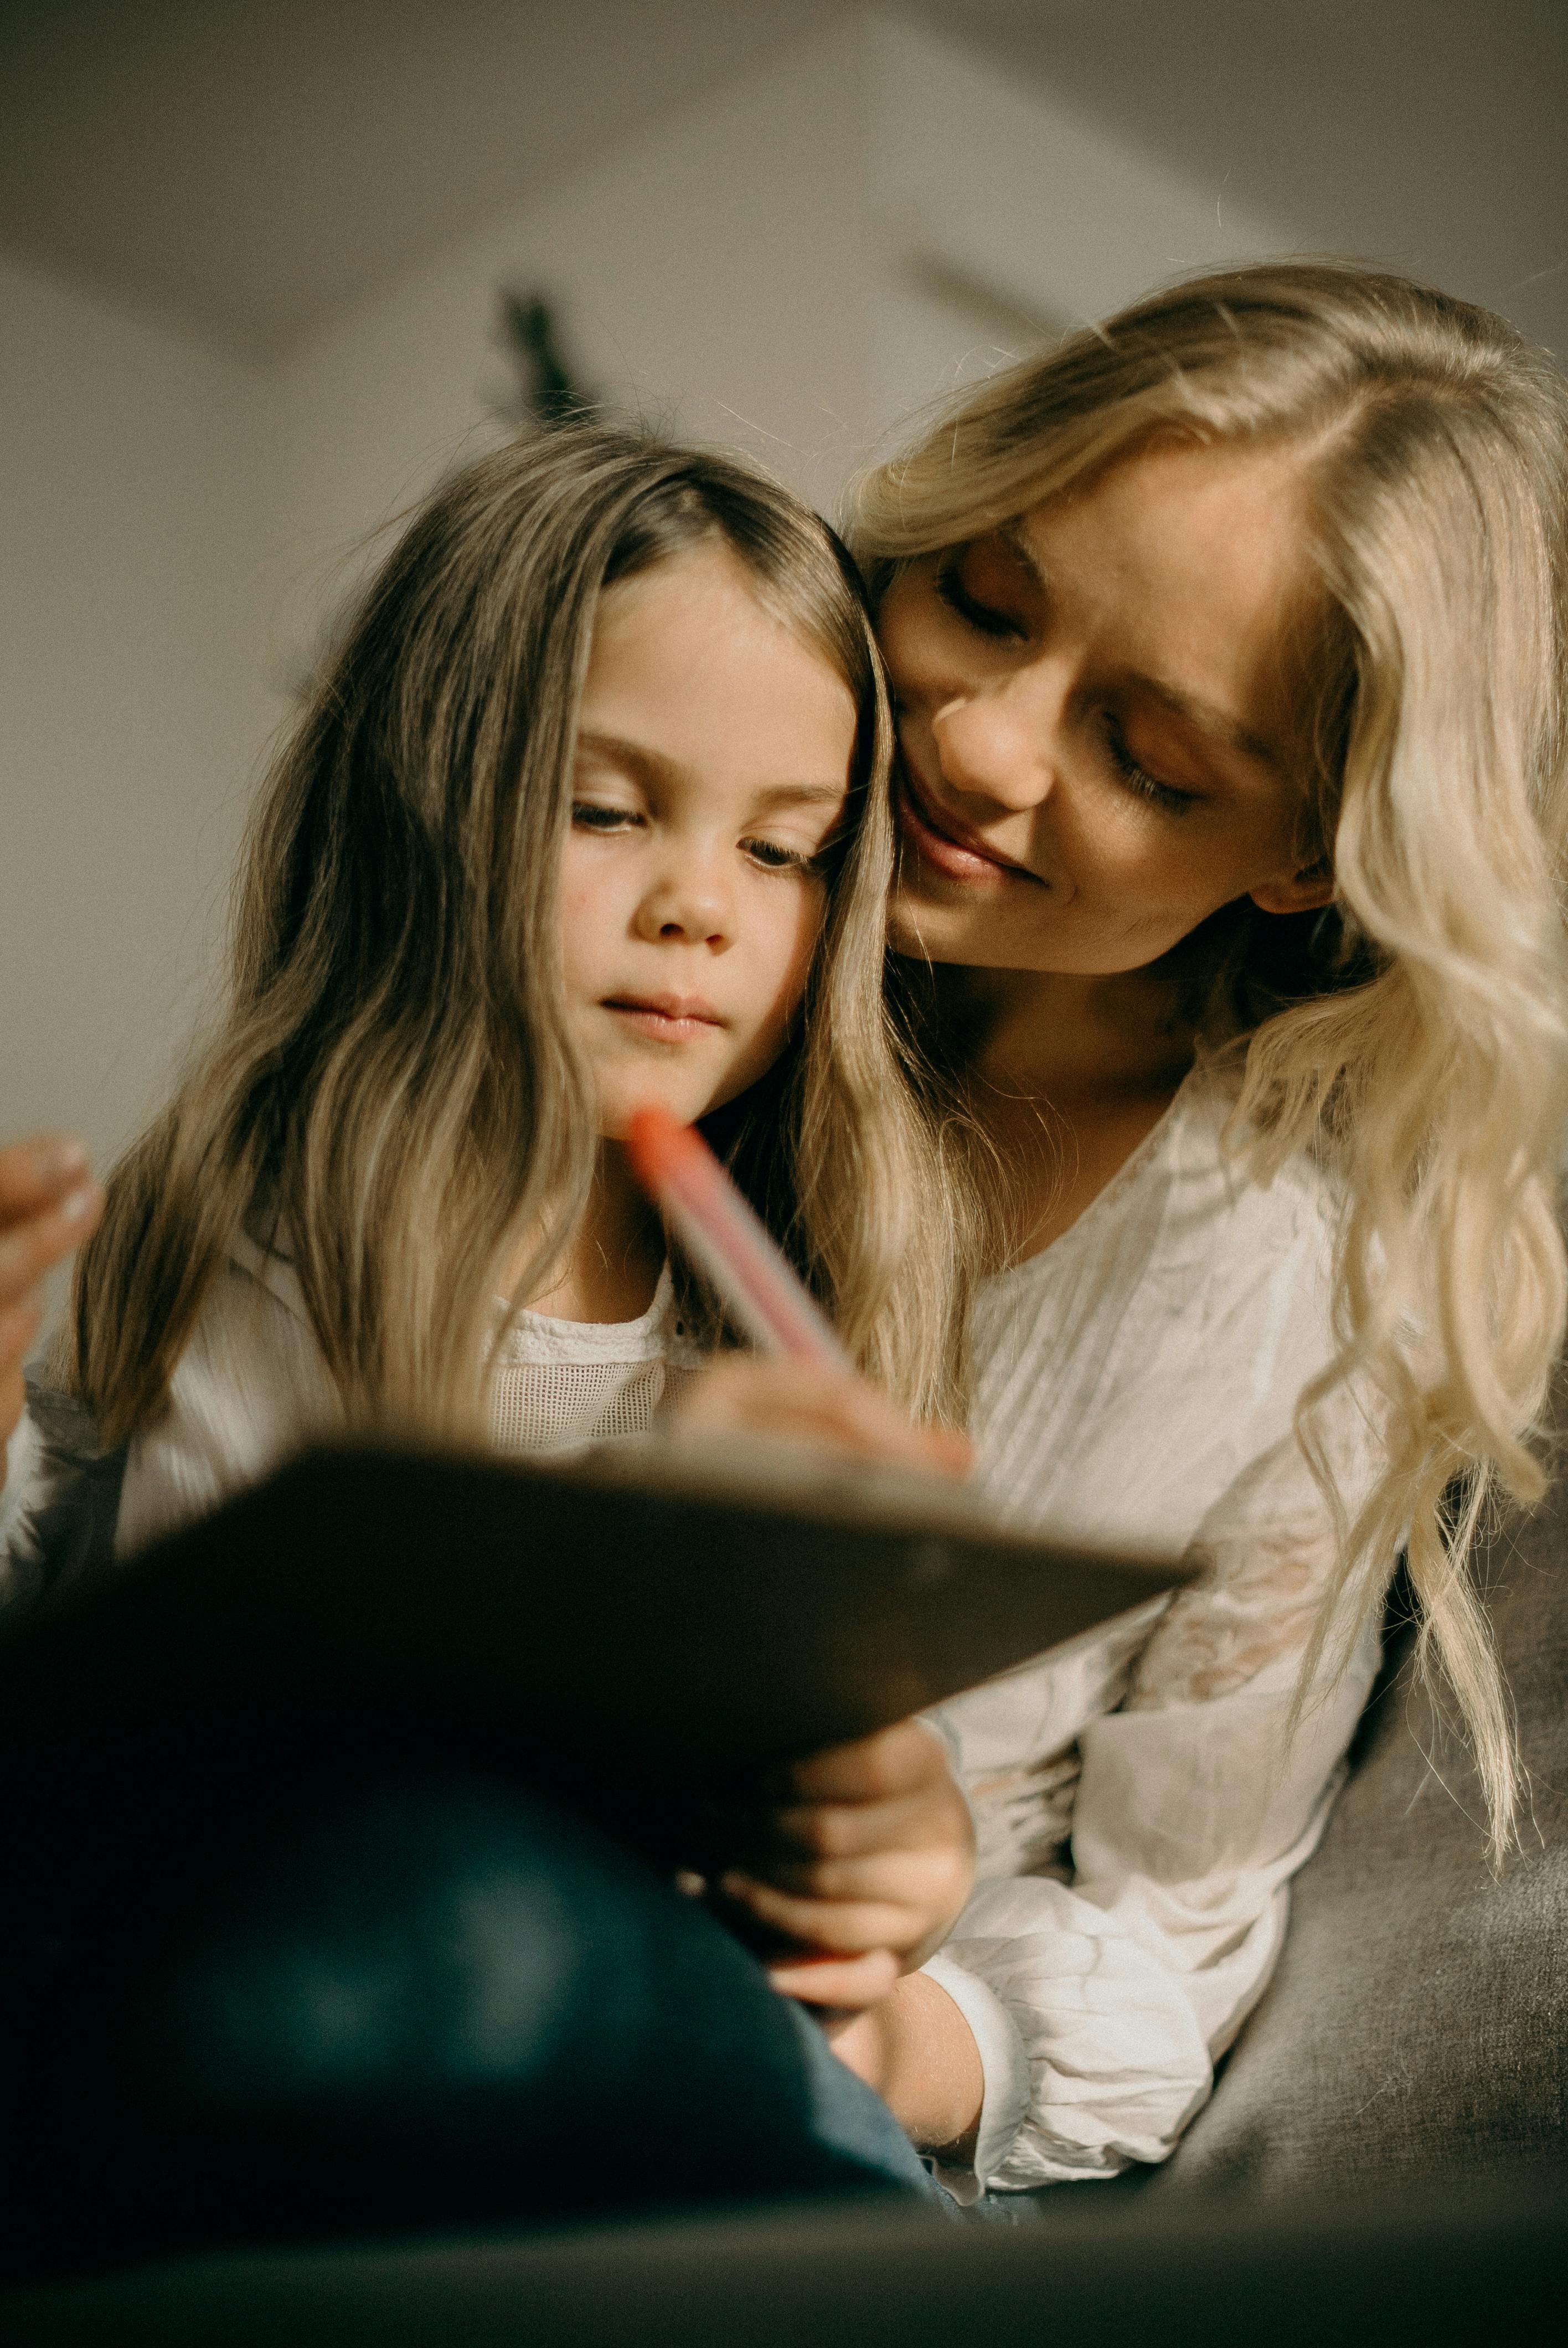 A woman looking lovingly at her daughter | Source: Pexels